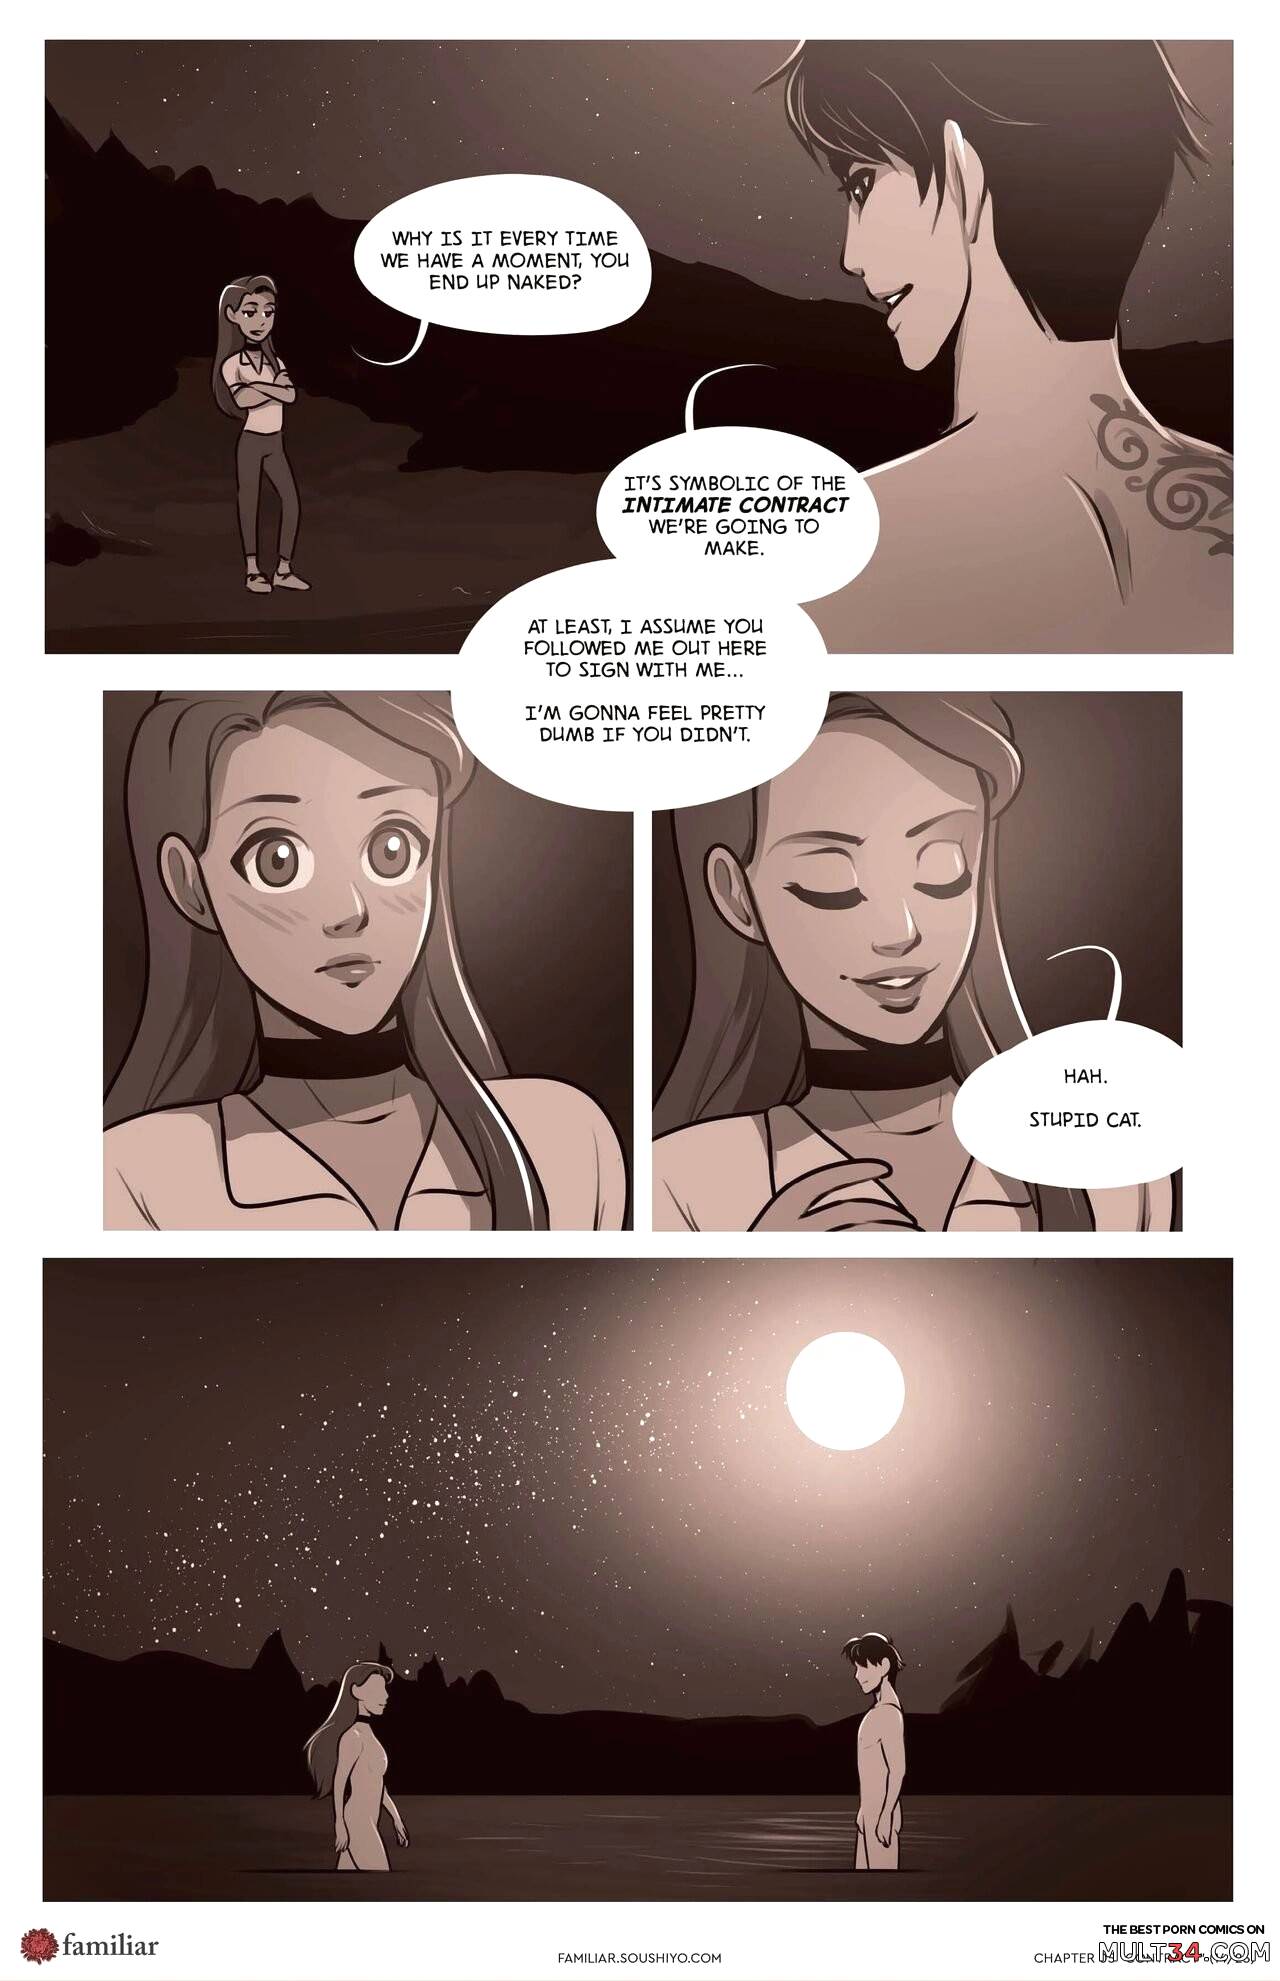 Familiar- Act 1 - Chapter 05 - Contract page 15